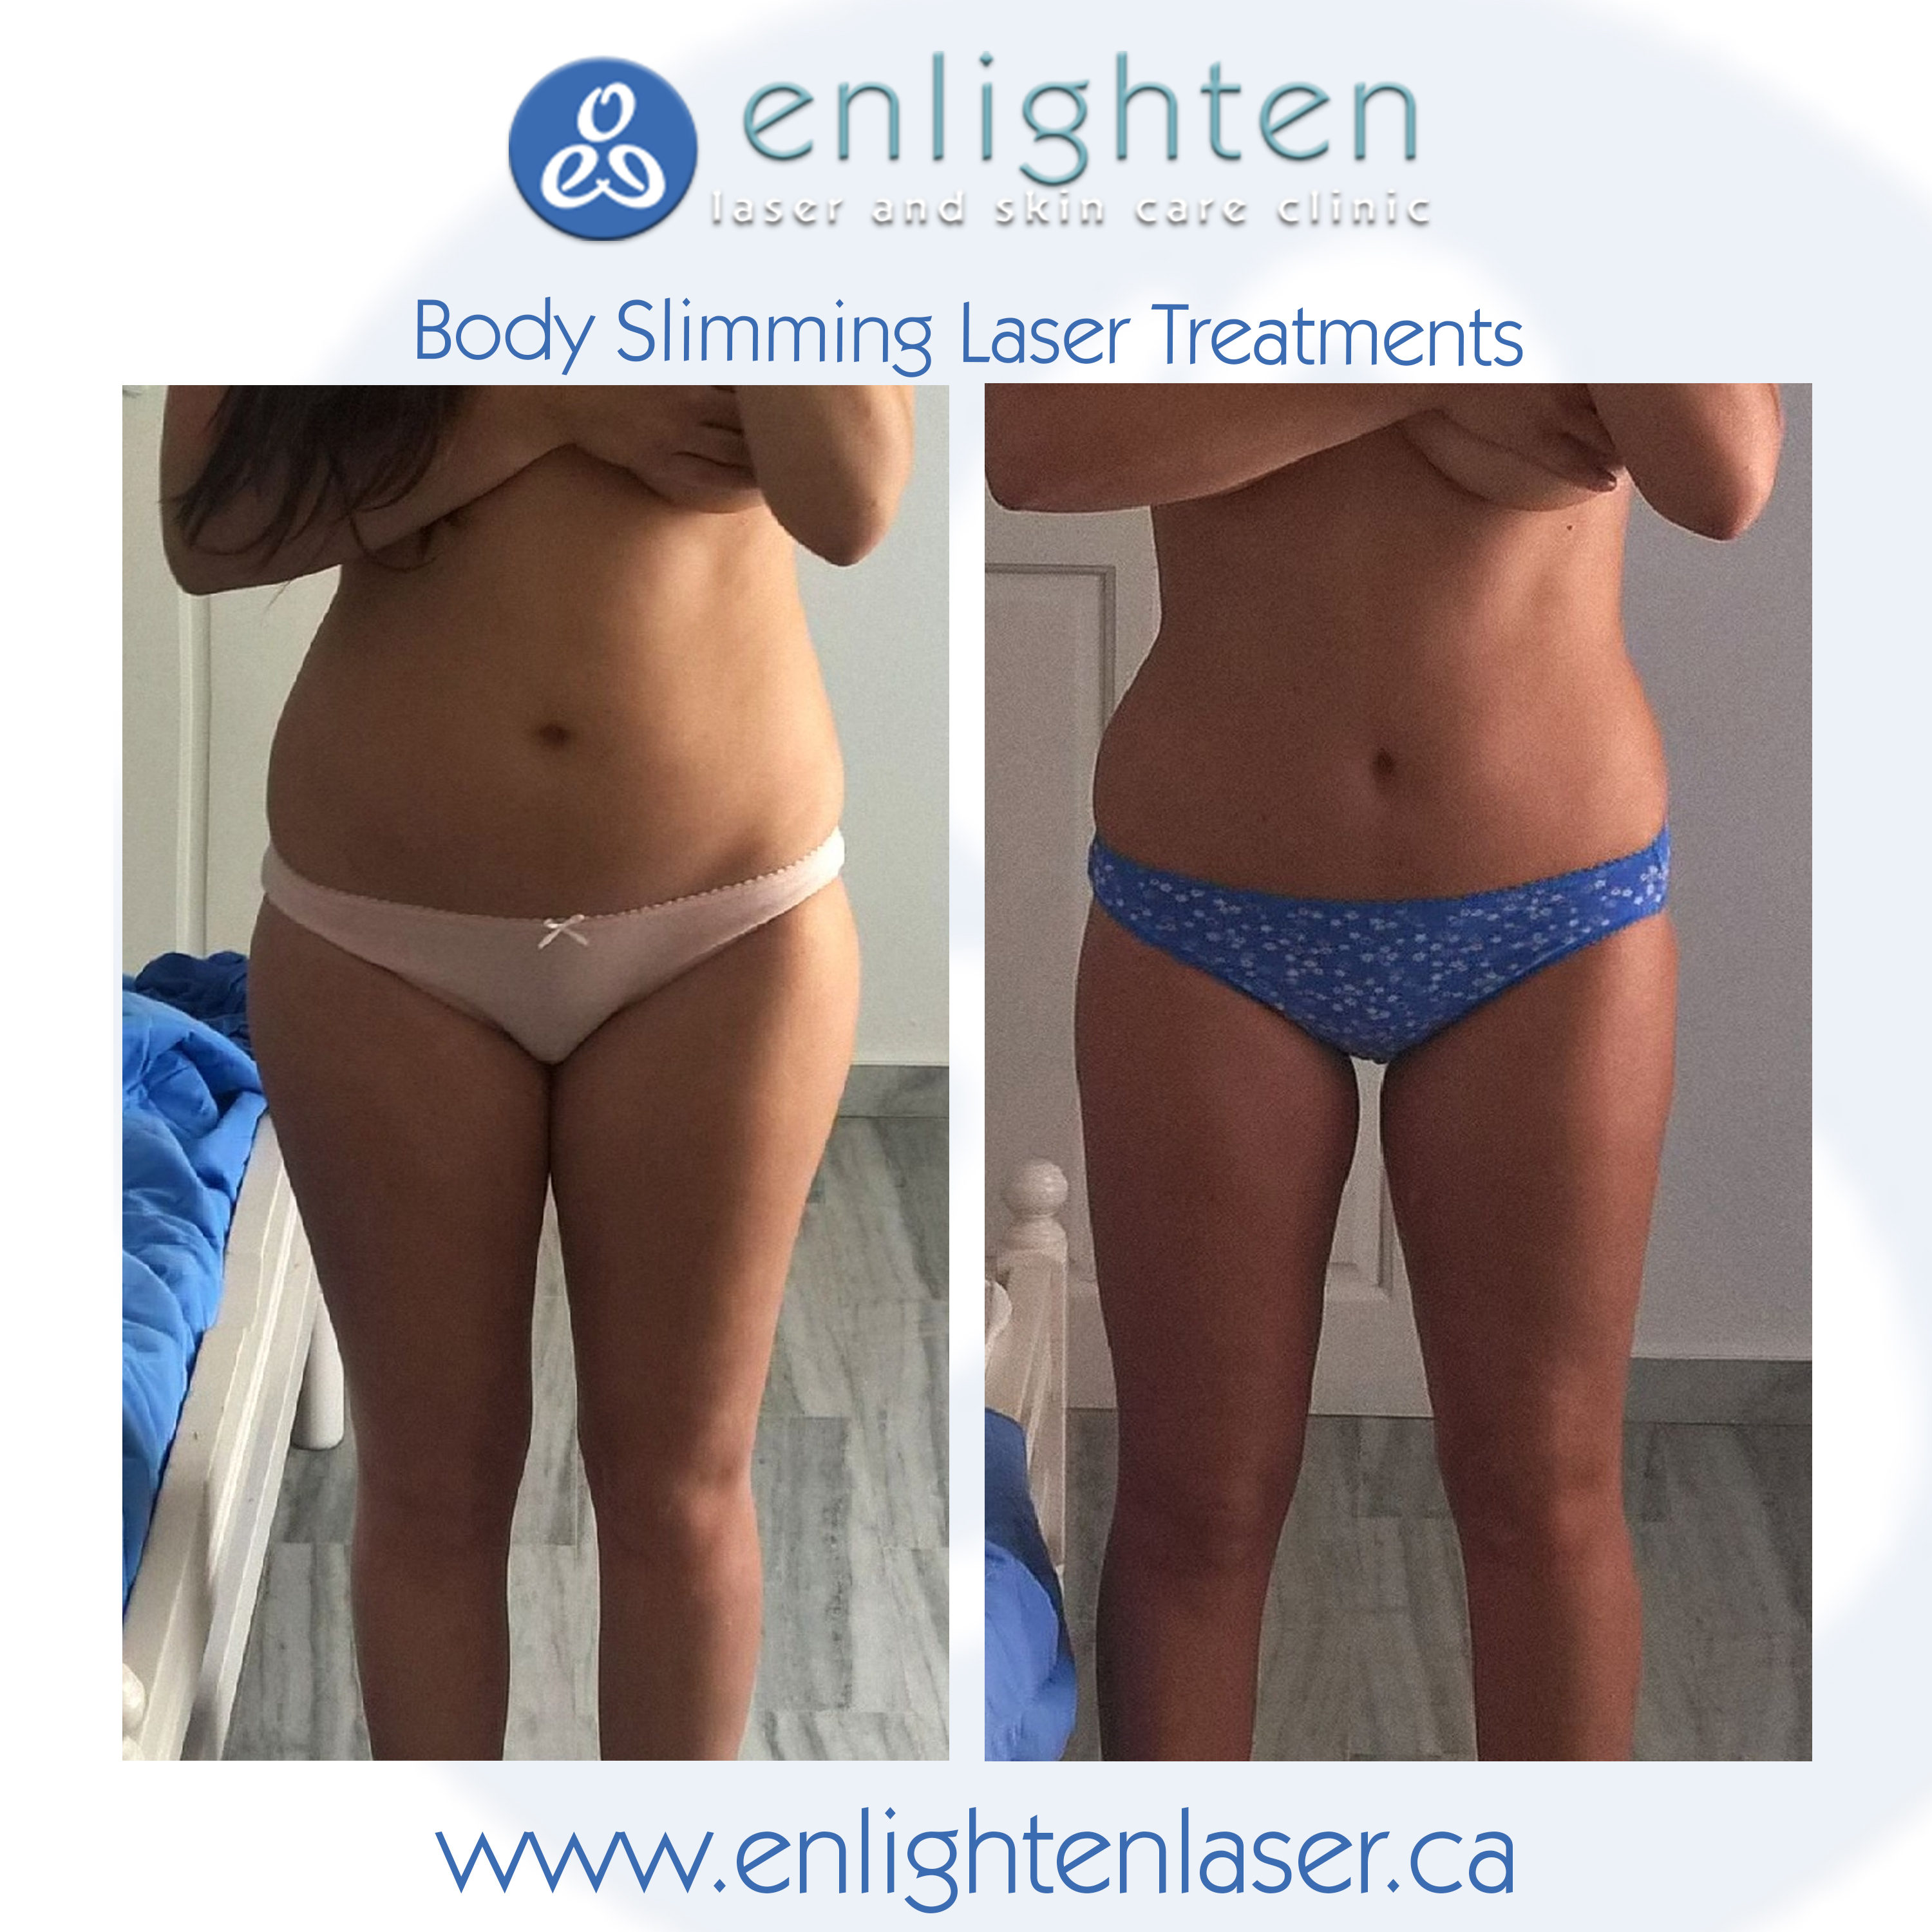 Body Slimming: What is it anyway? | Enlighten Laser and Skin Care Clinic